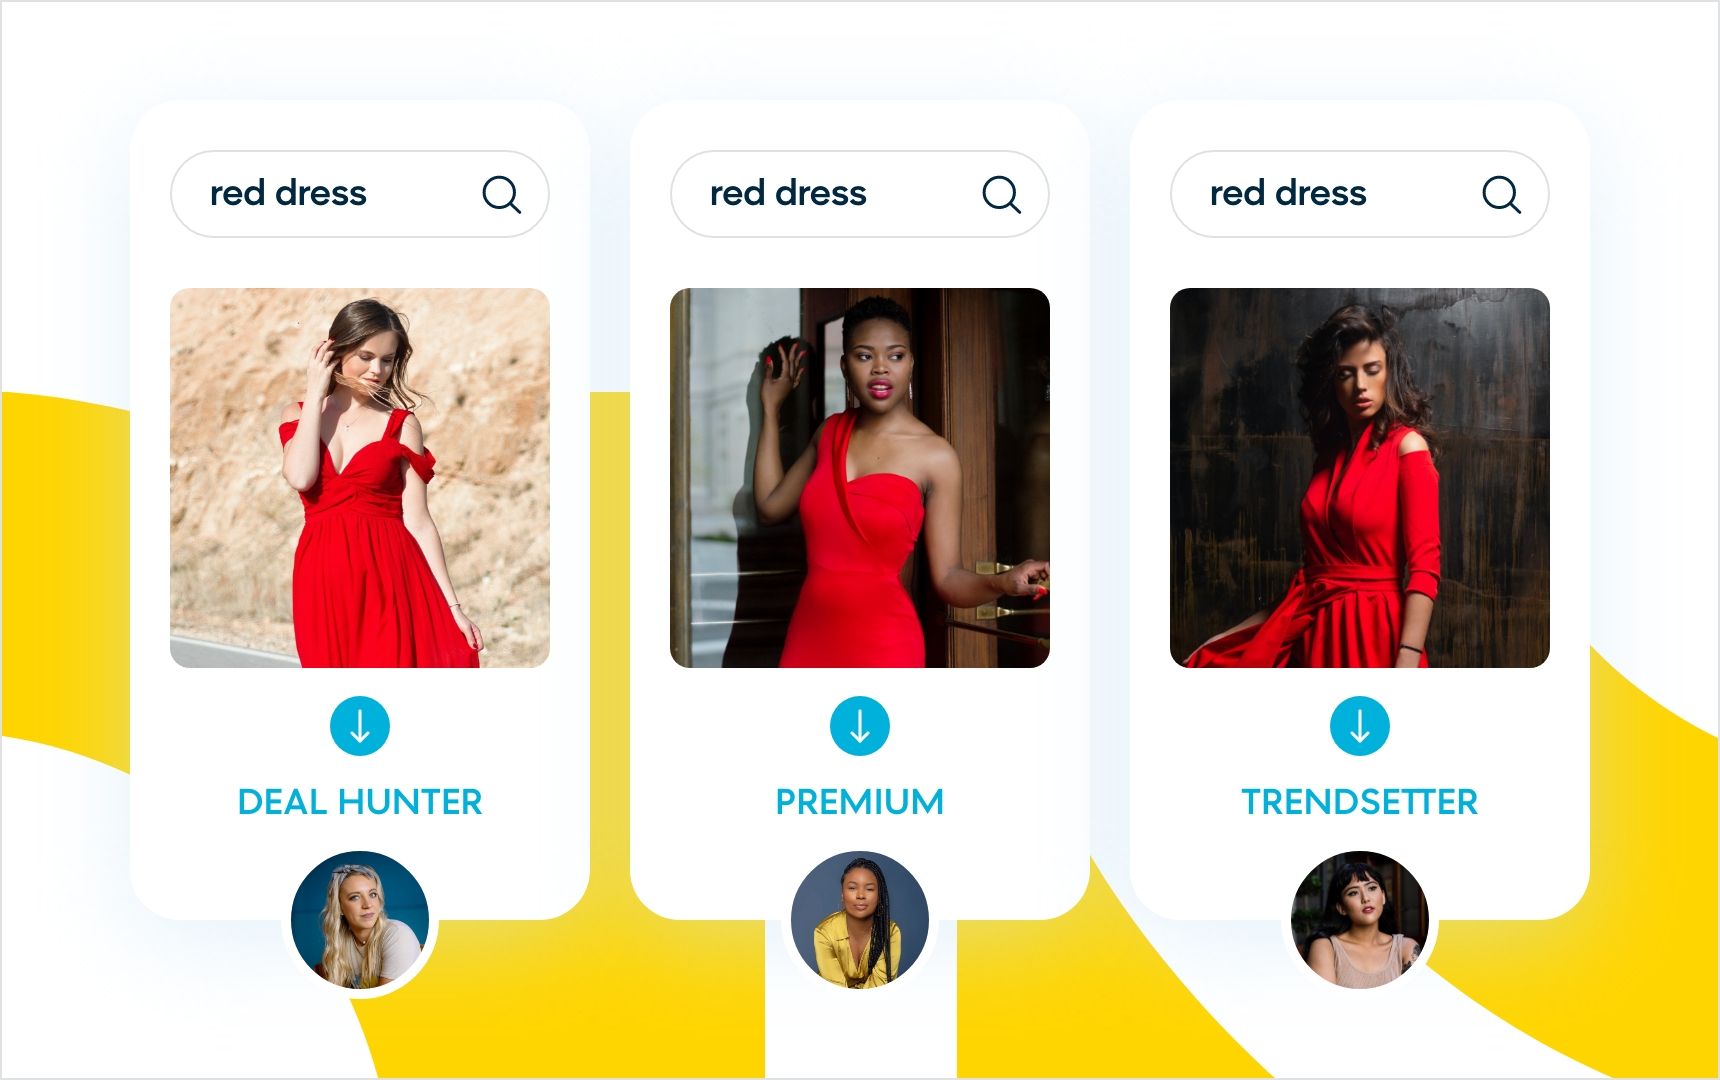 AI using customer data to deliver relevant search results for "red dress"